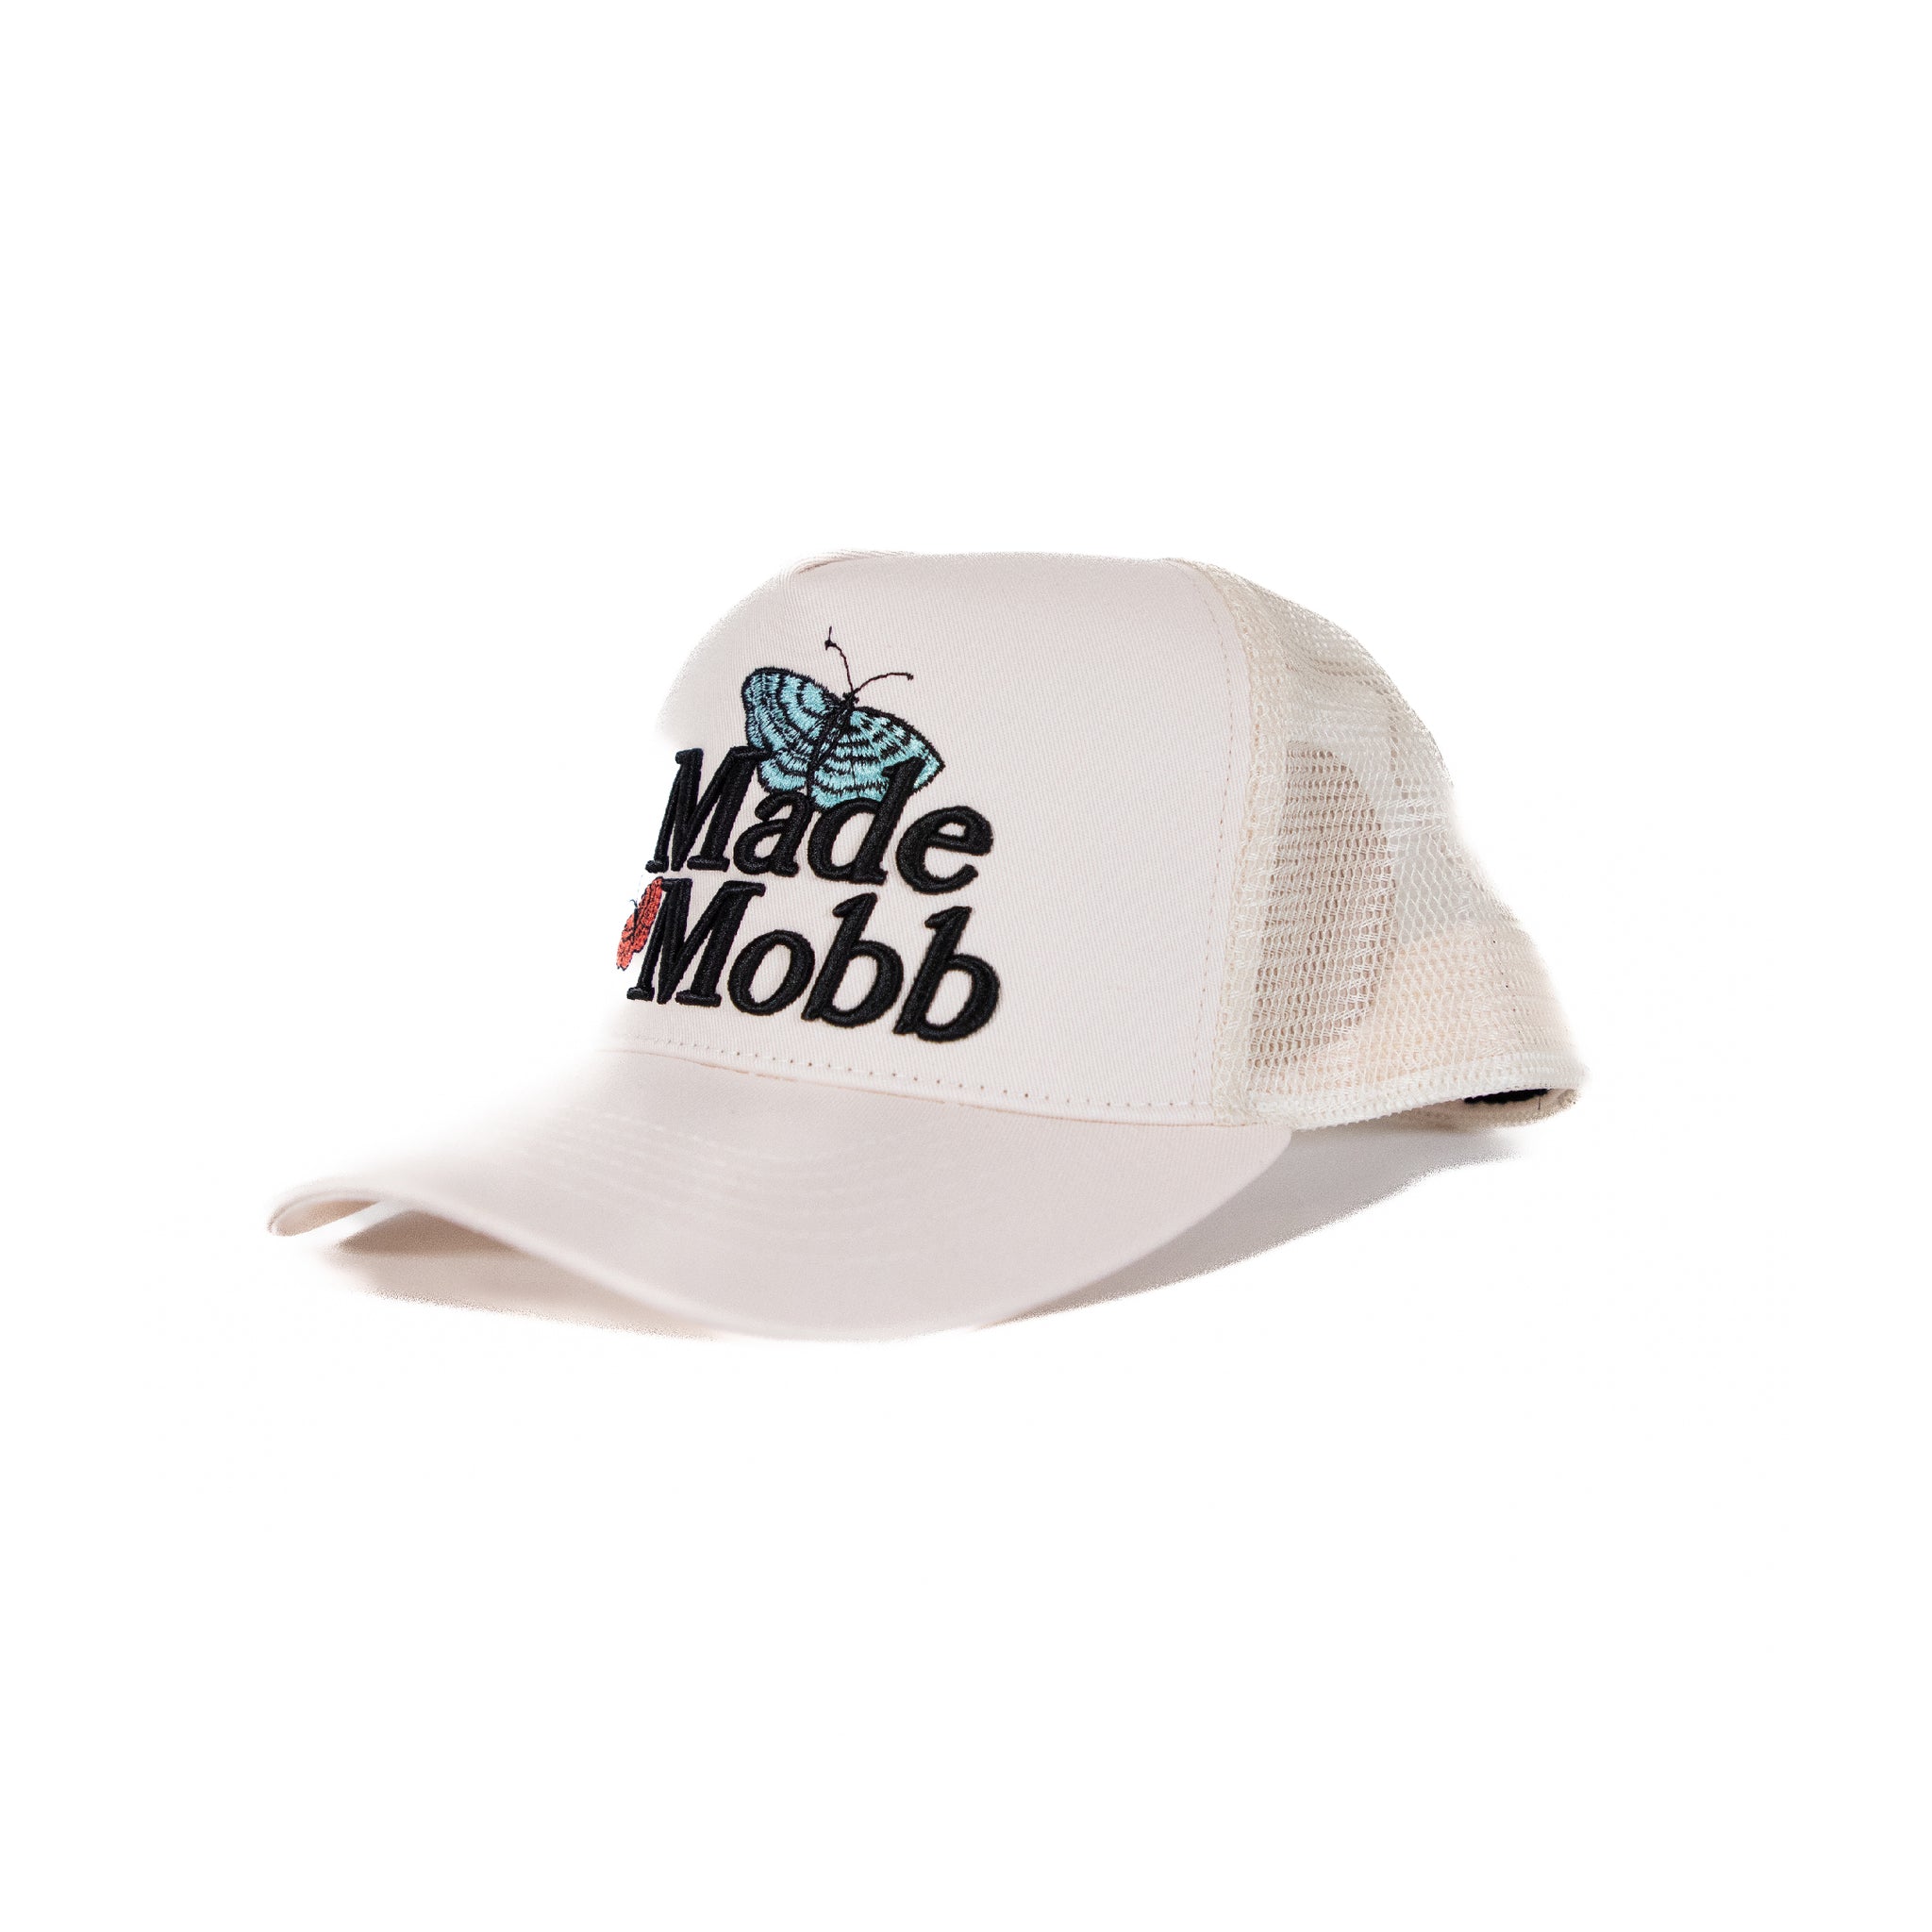 MADE MOBB Butterfly Mesh Hat - Cream